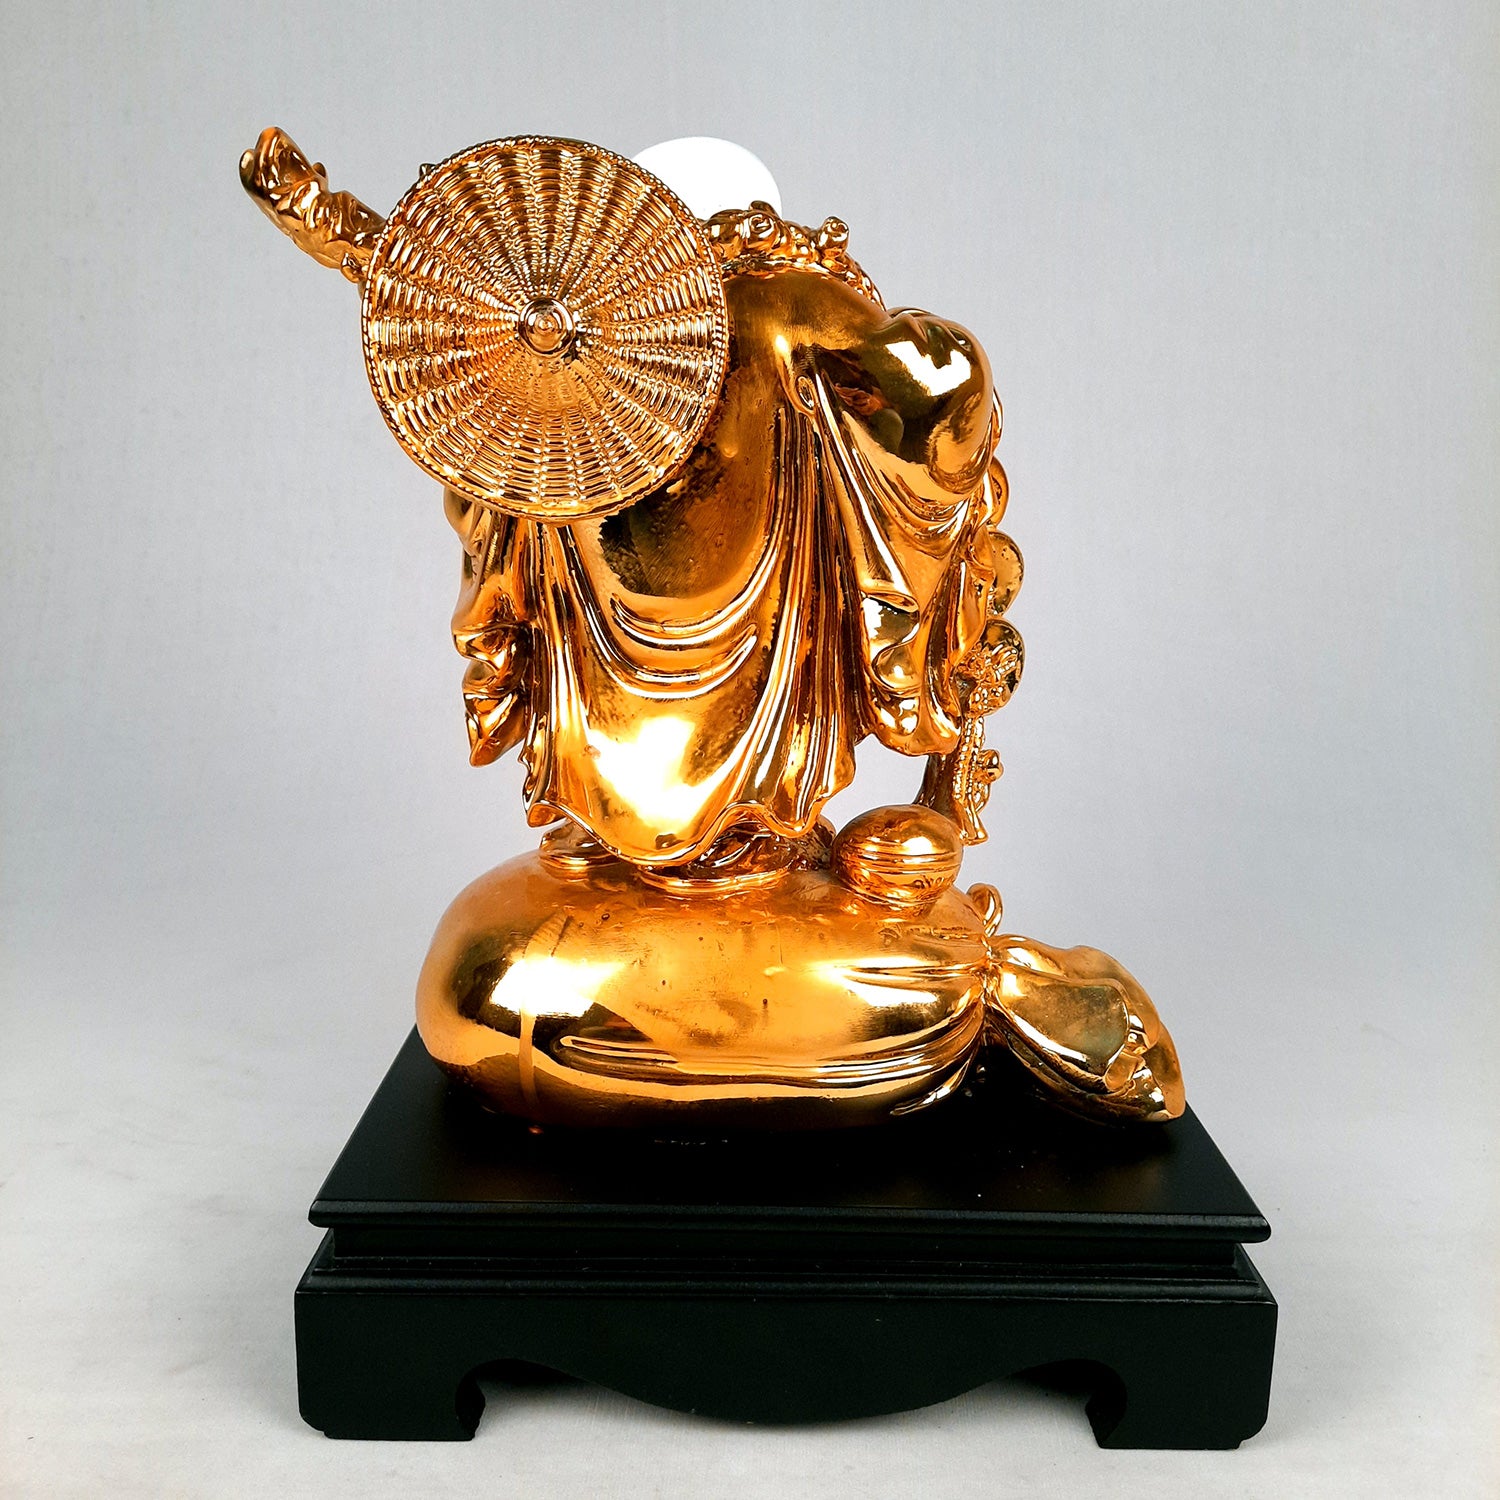 Laughing Buddha for Luck | Happy Man for Fortune & Prosperity | Office Decor | Table Decor - 12.5 Inch-apkamart